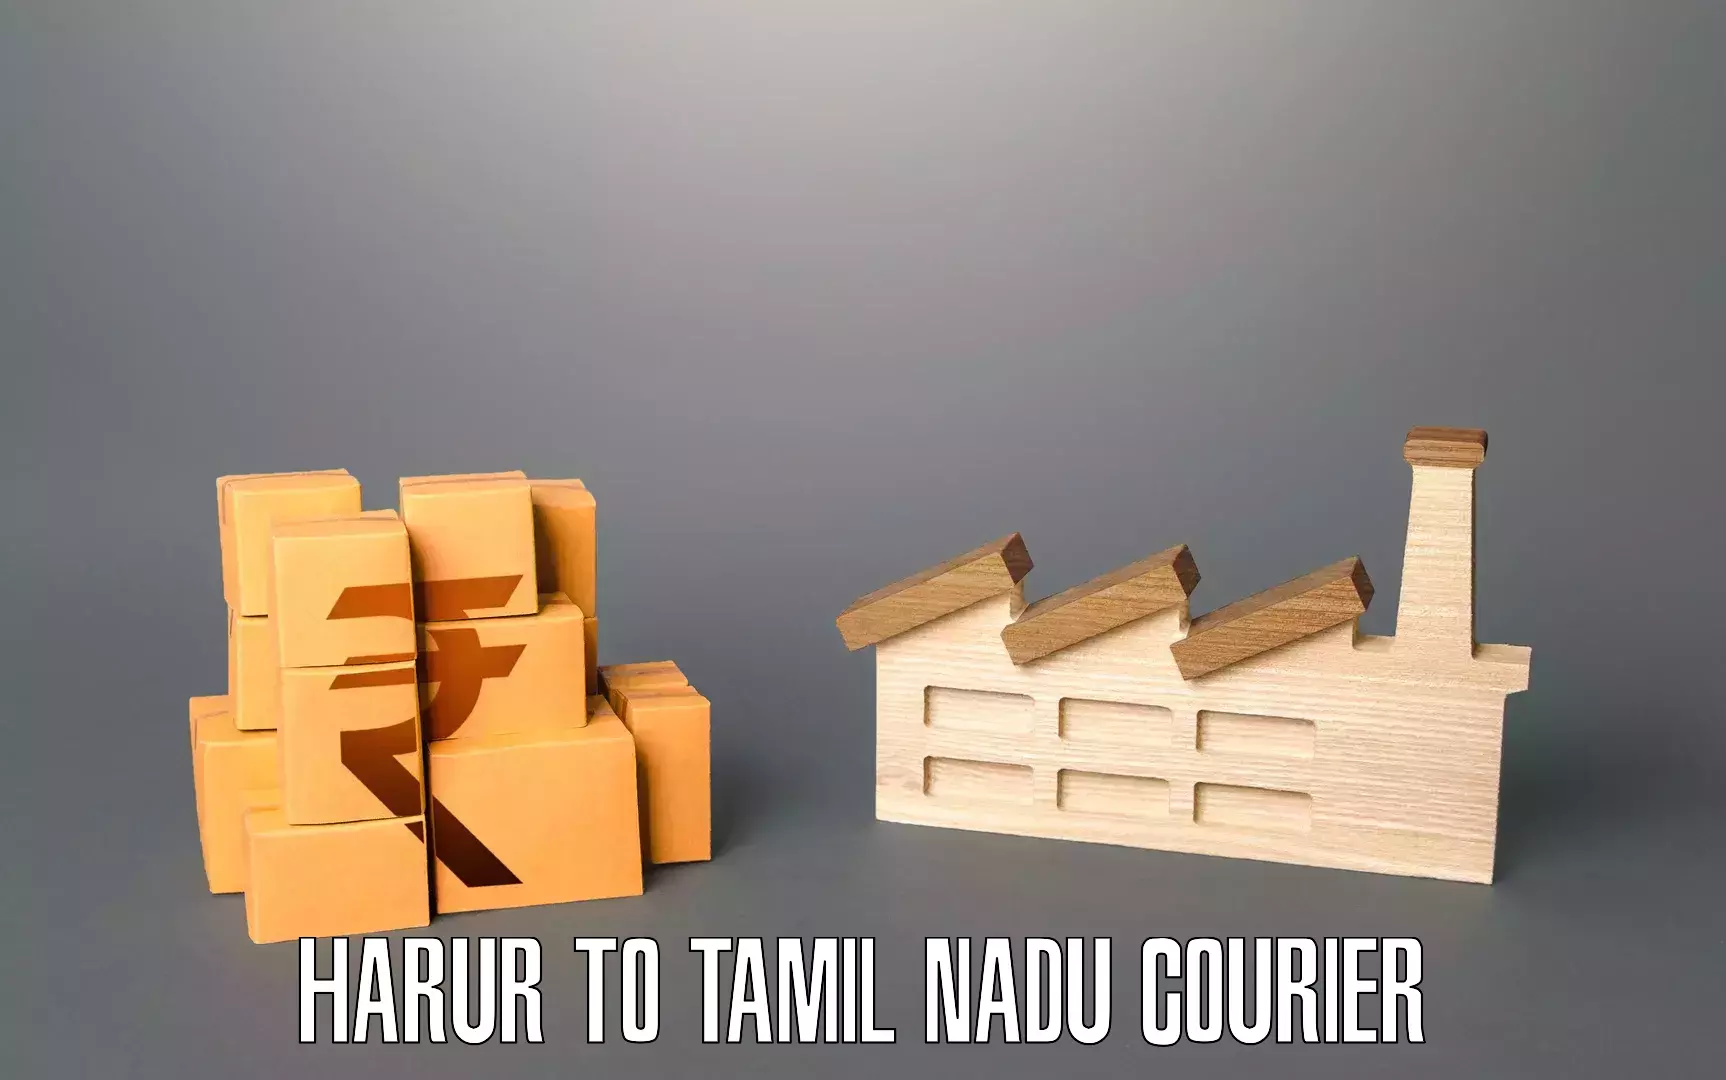 Quality moving company Harur to Vellore Institute of Technology